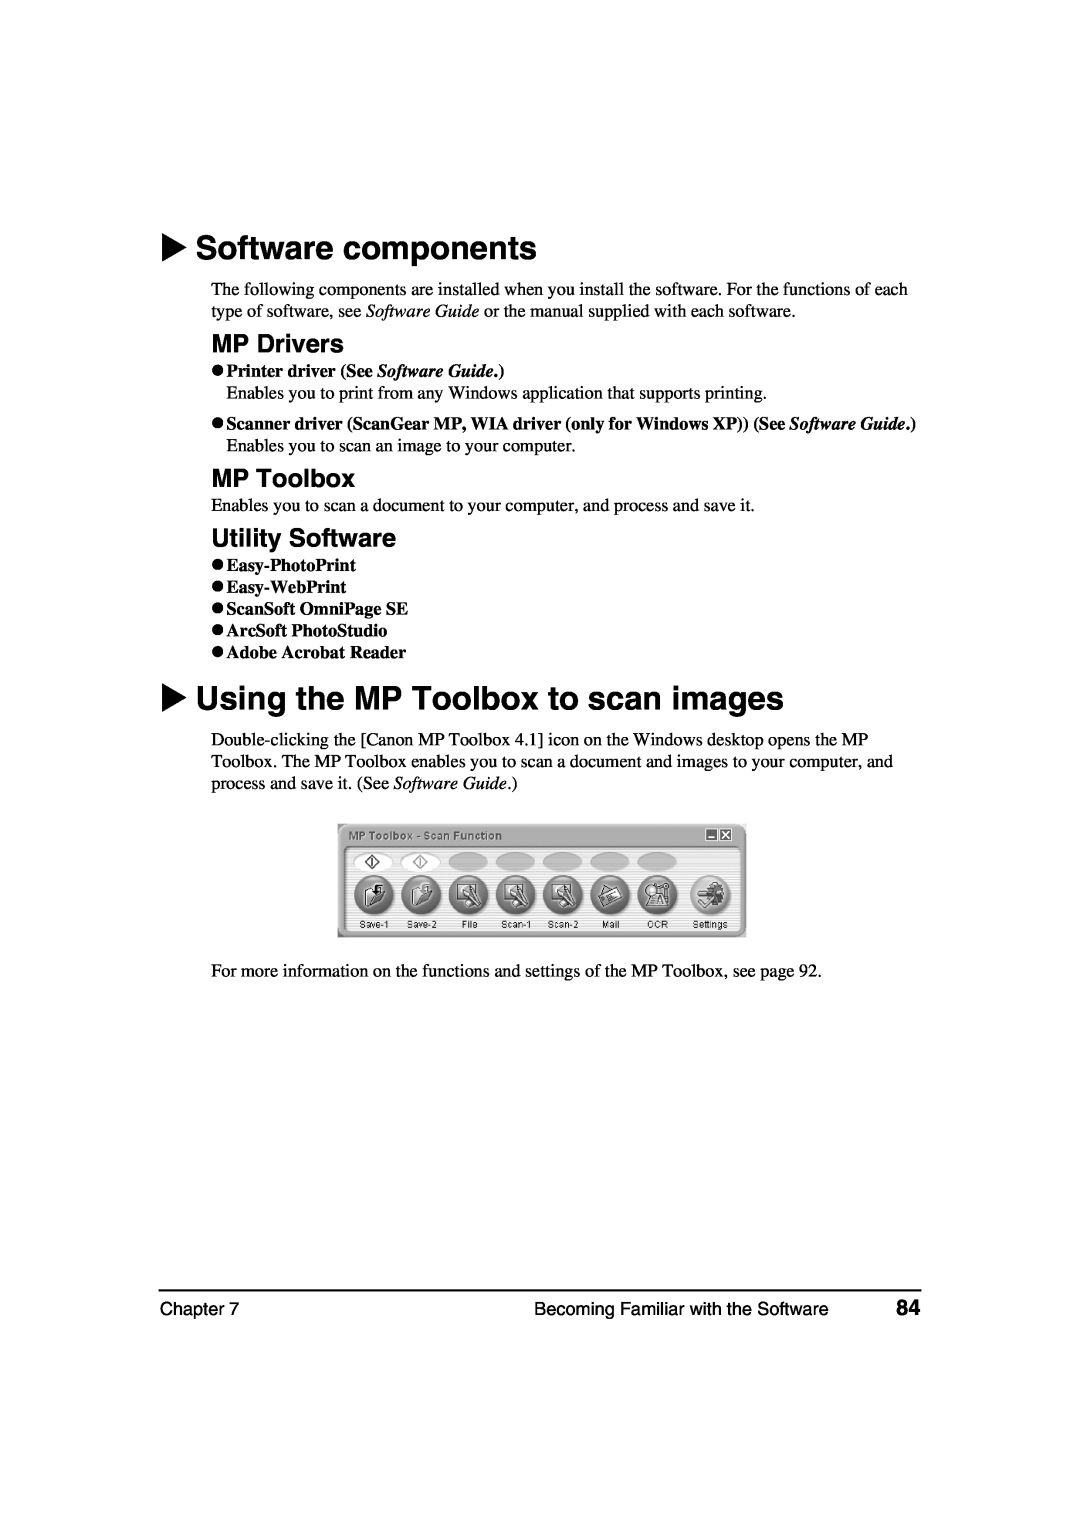 Canon MP360, MP370 manual Software components, Using the MP Toolbox to scan images, MP Drivers, Utility Software 